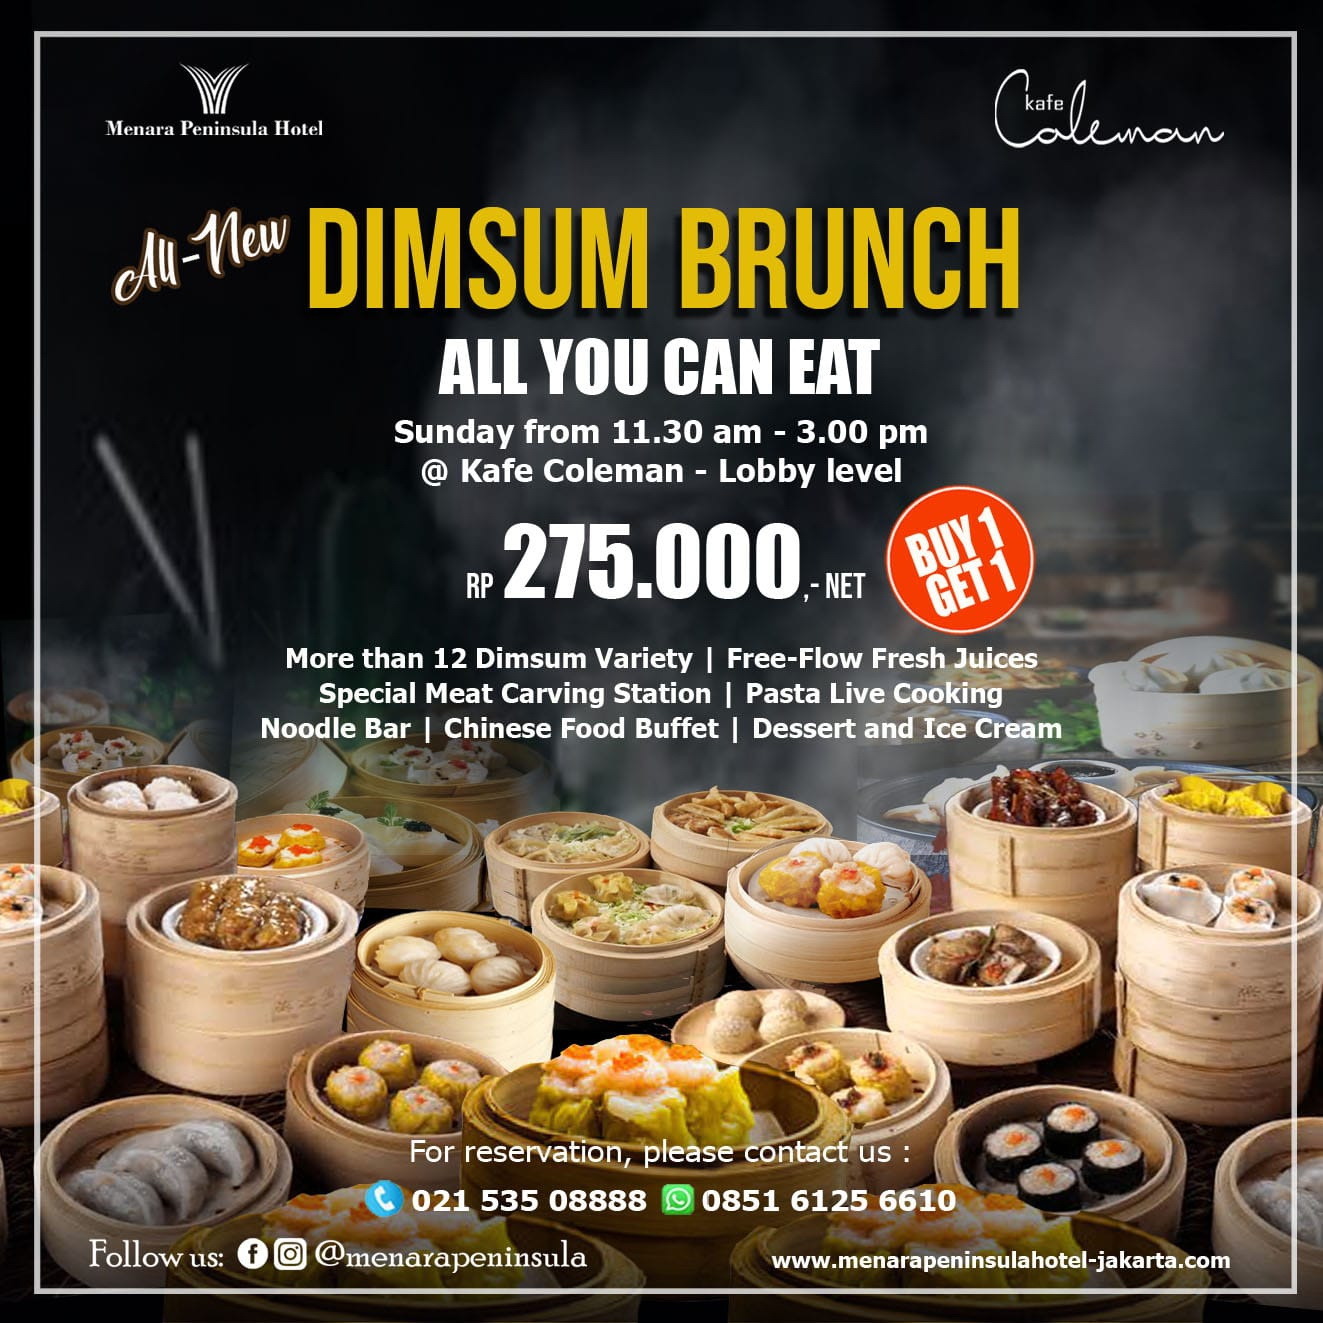 All You Can Eat Dimsum Brunch